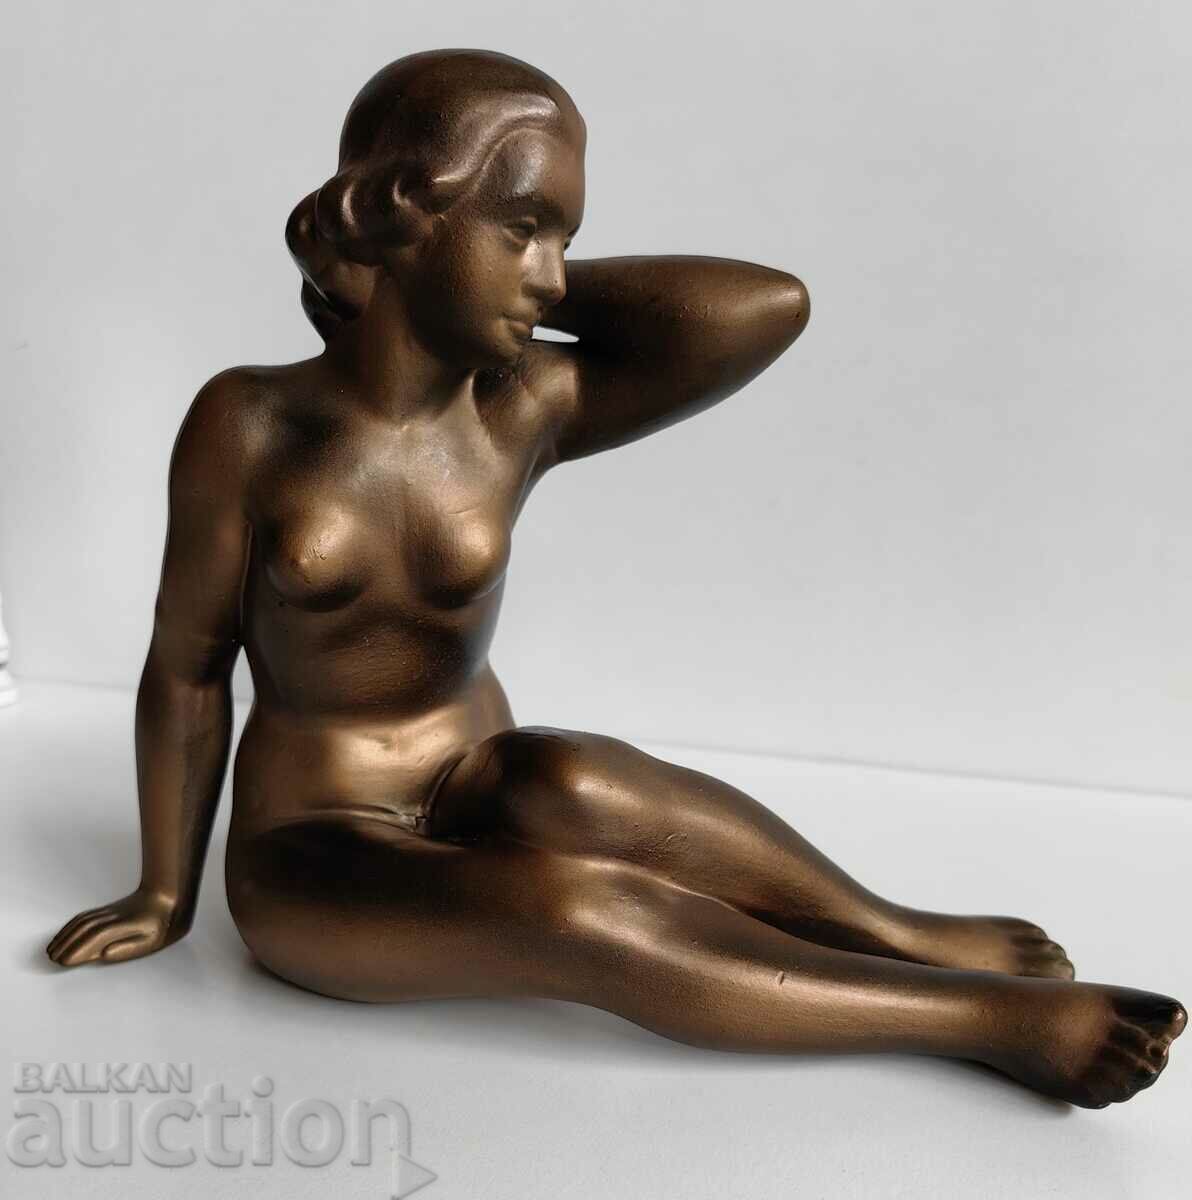 LARGE CERAMIC FIGURE OF A NAKED WOMAN HEALTHY STATUETTE